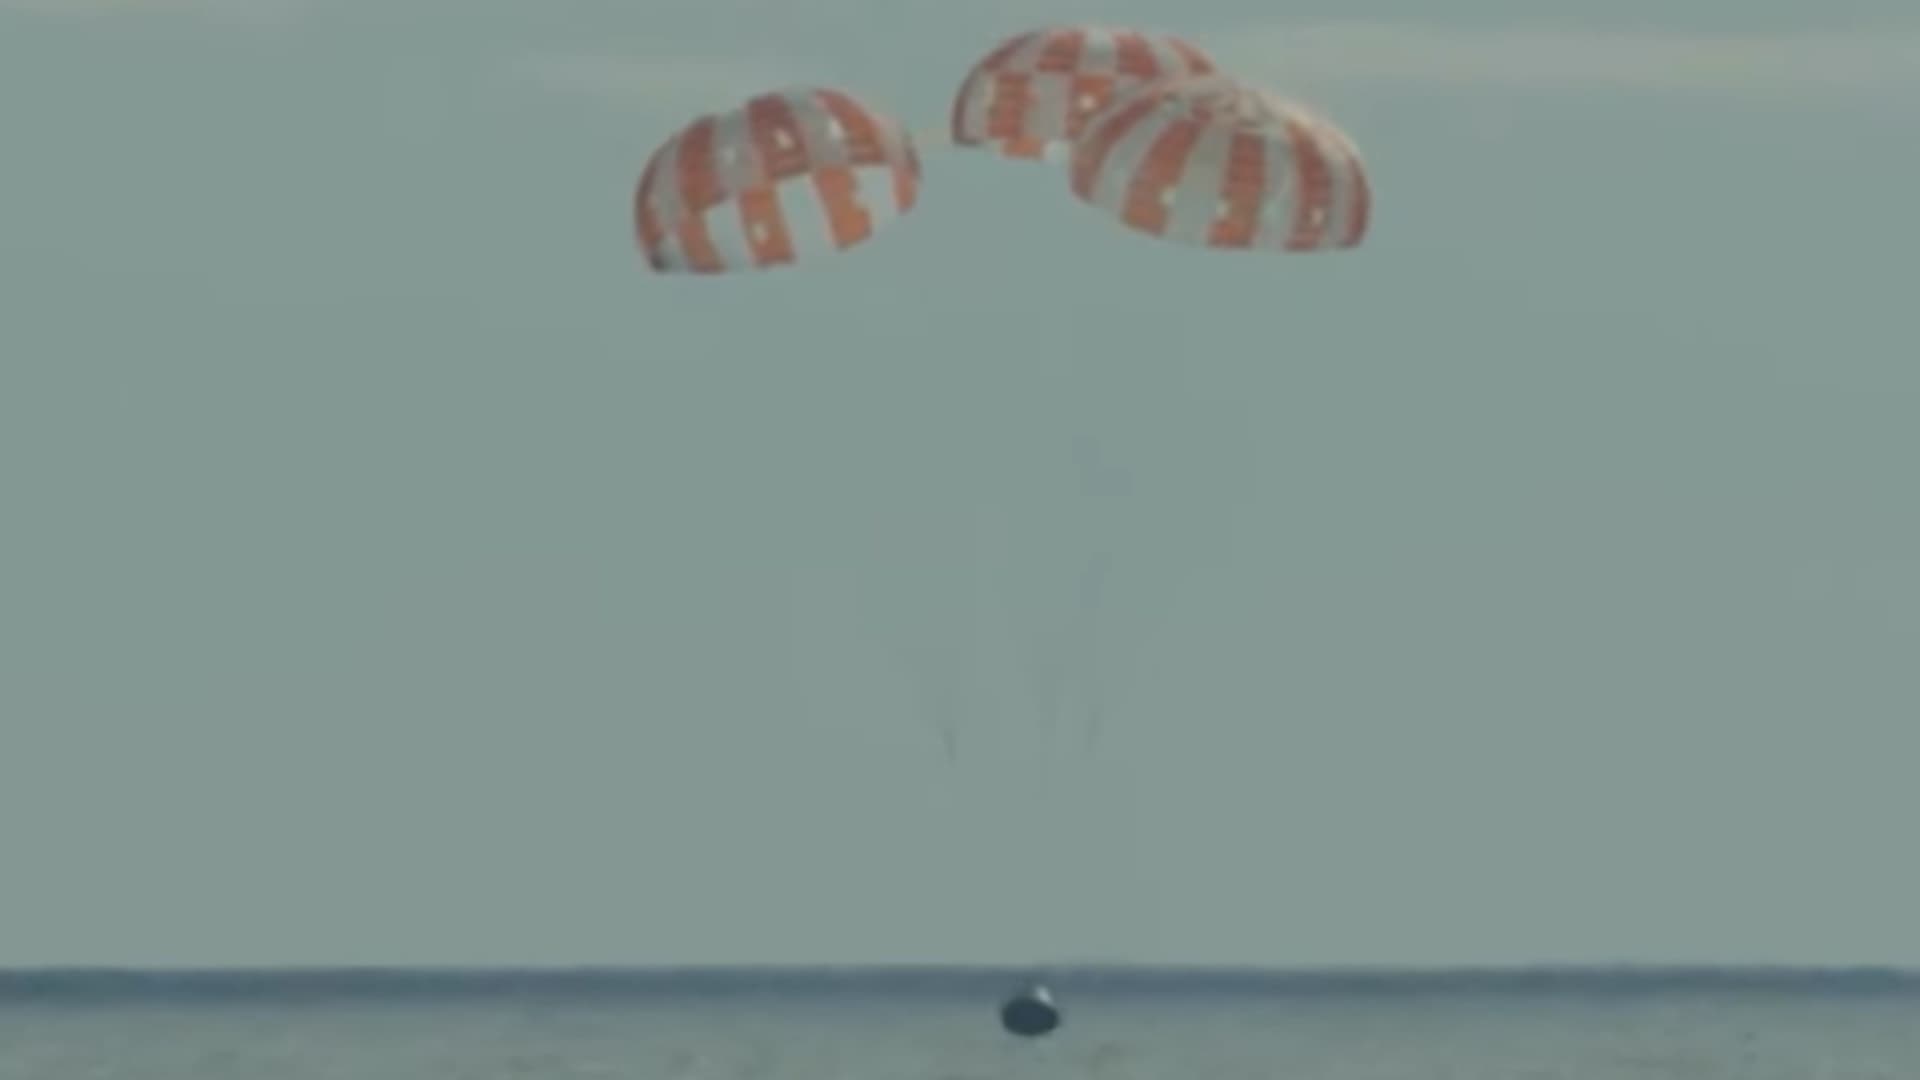 NASA’s Orion capsule splashes down, completing the first Artemis moon